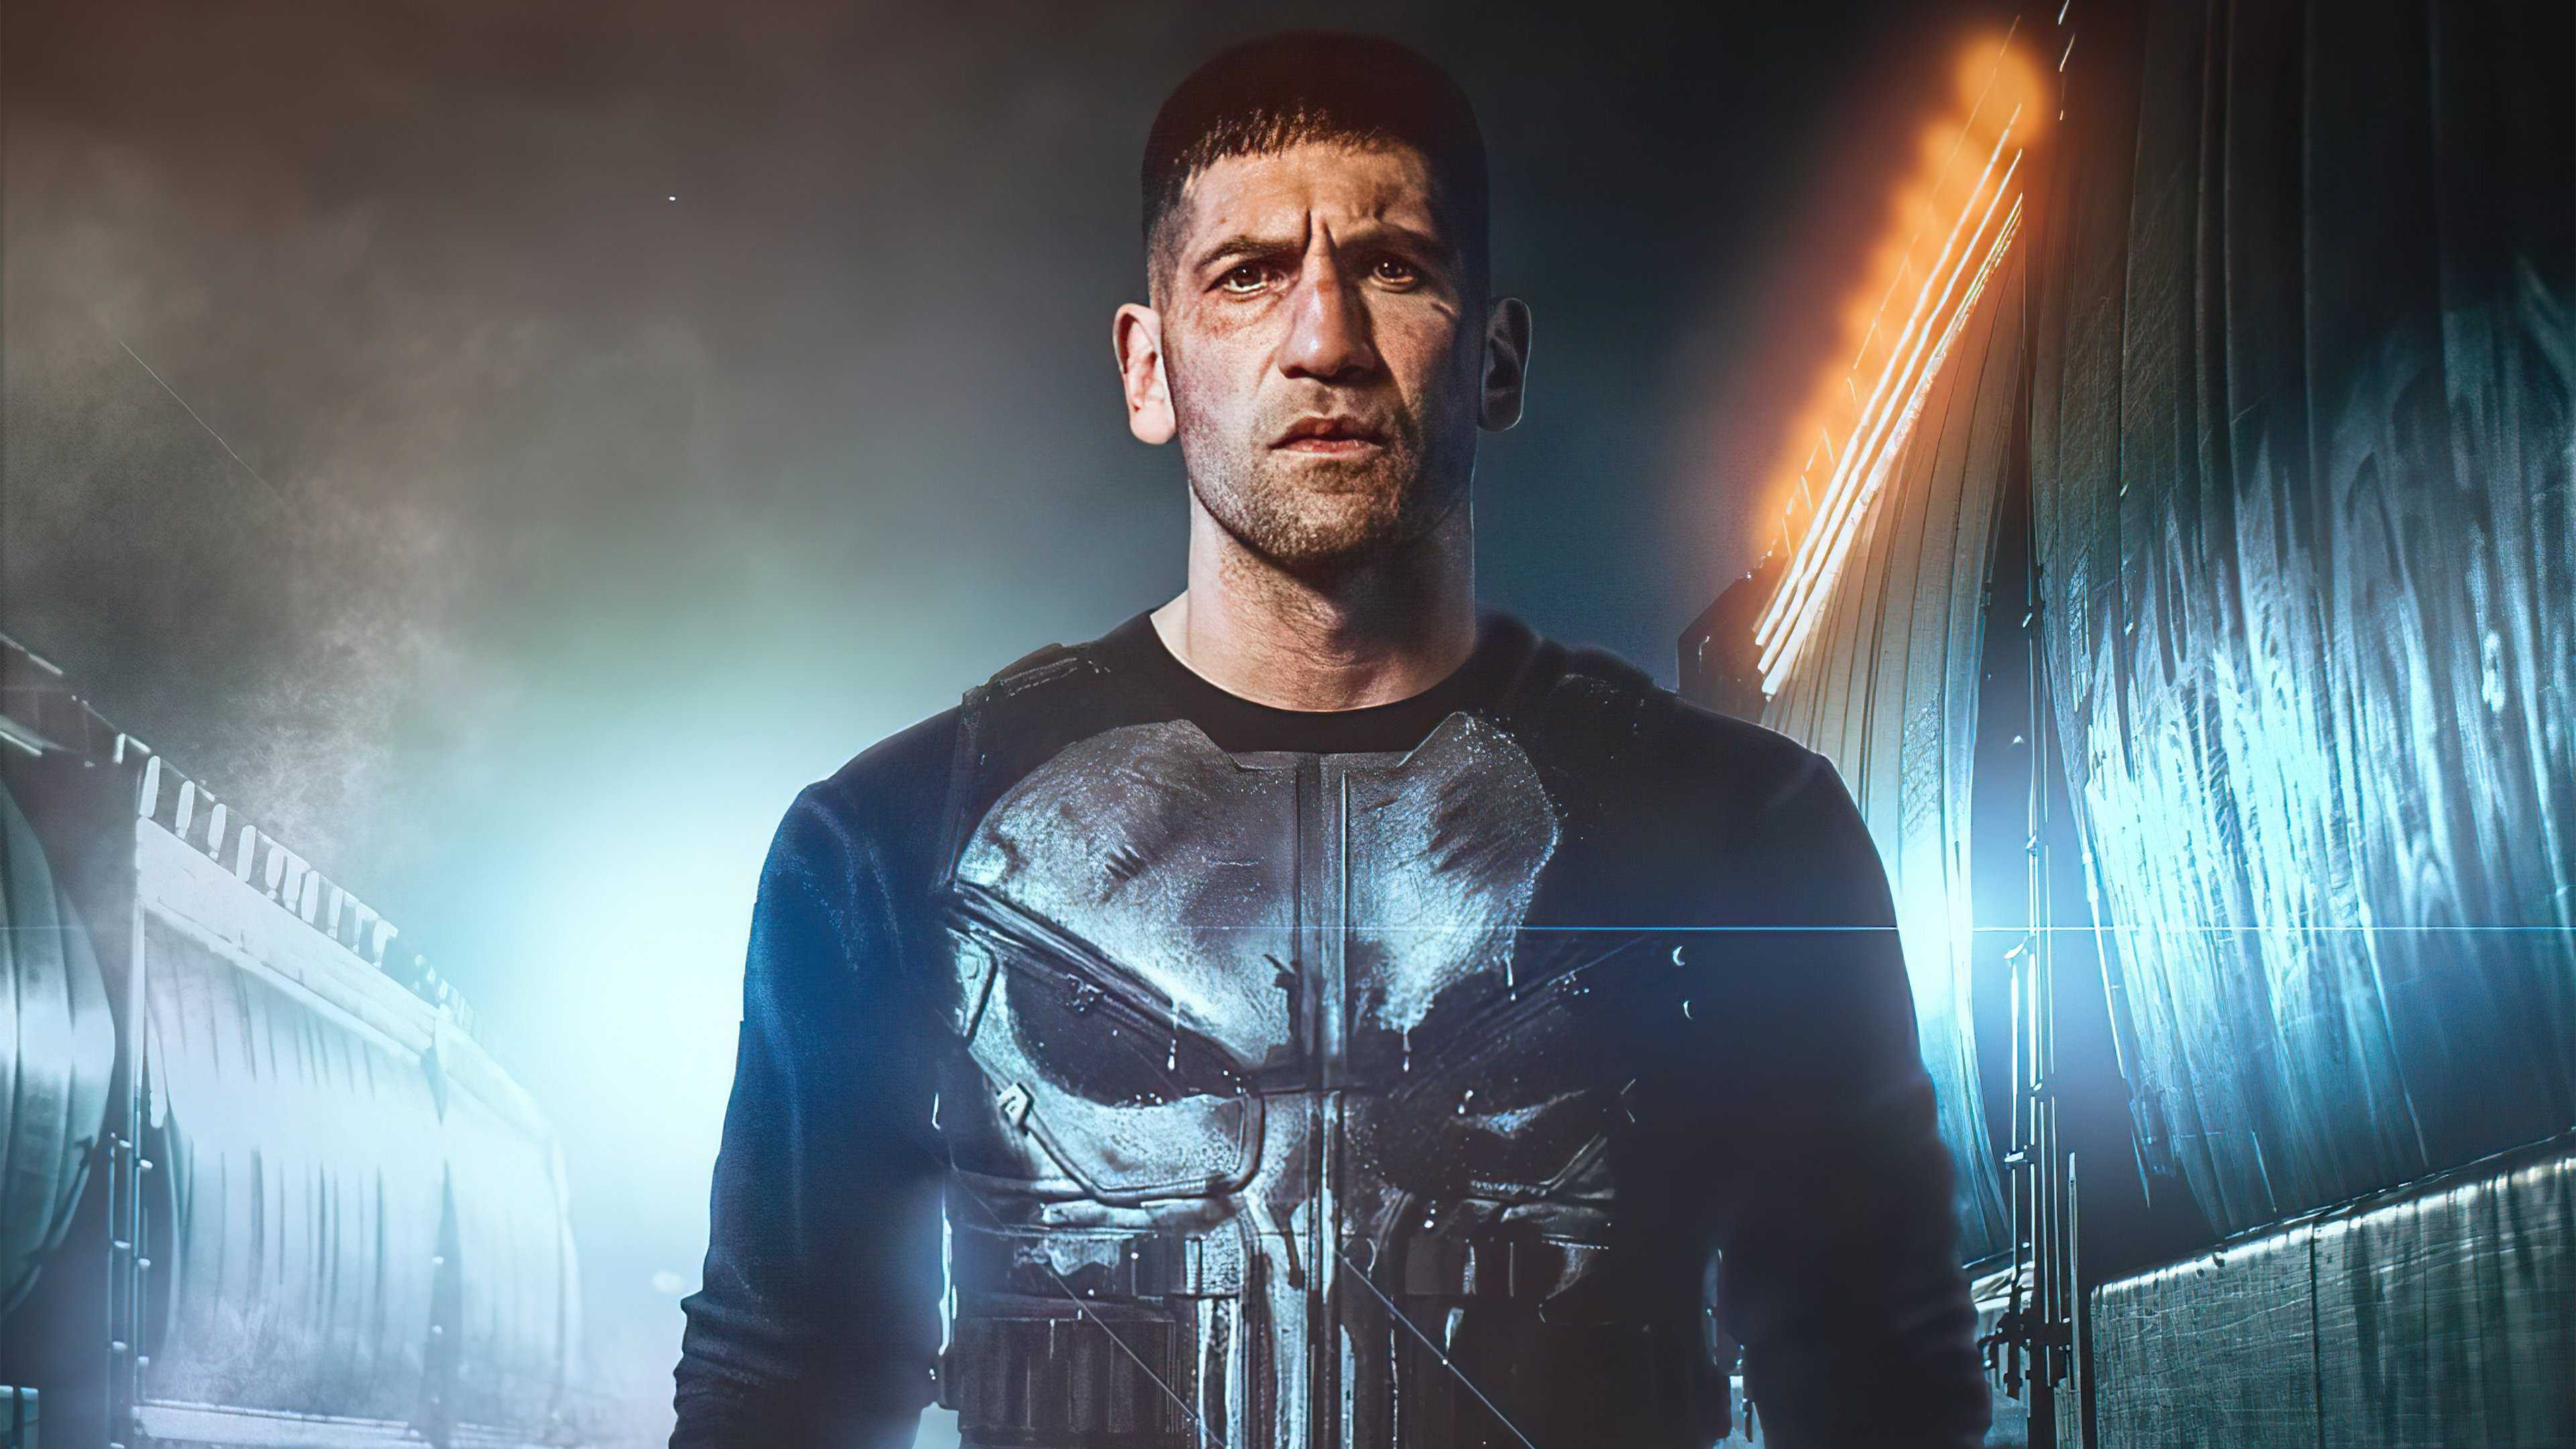 Rosario Dawson may have confirmed that a Punisher series starring Jon Bernthal is in the works at Marvel